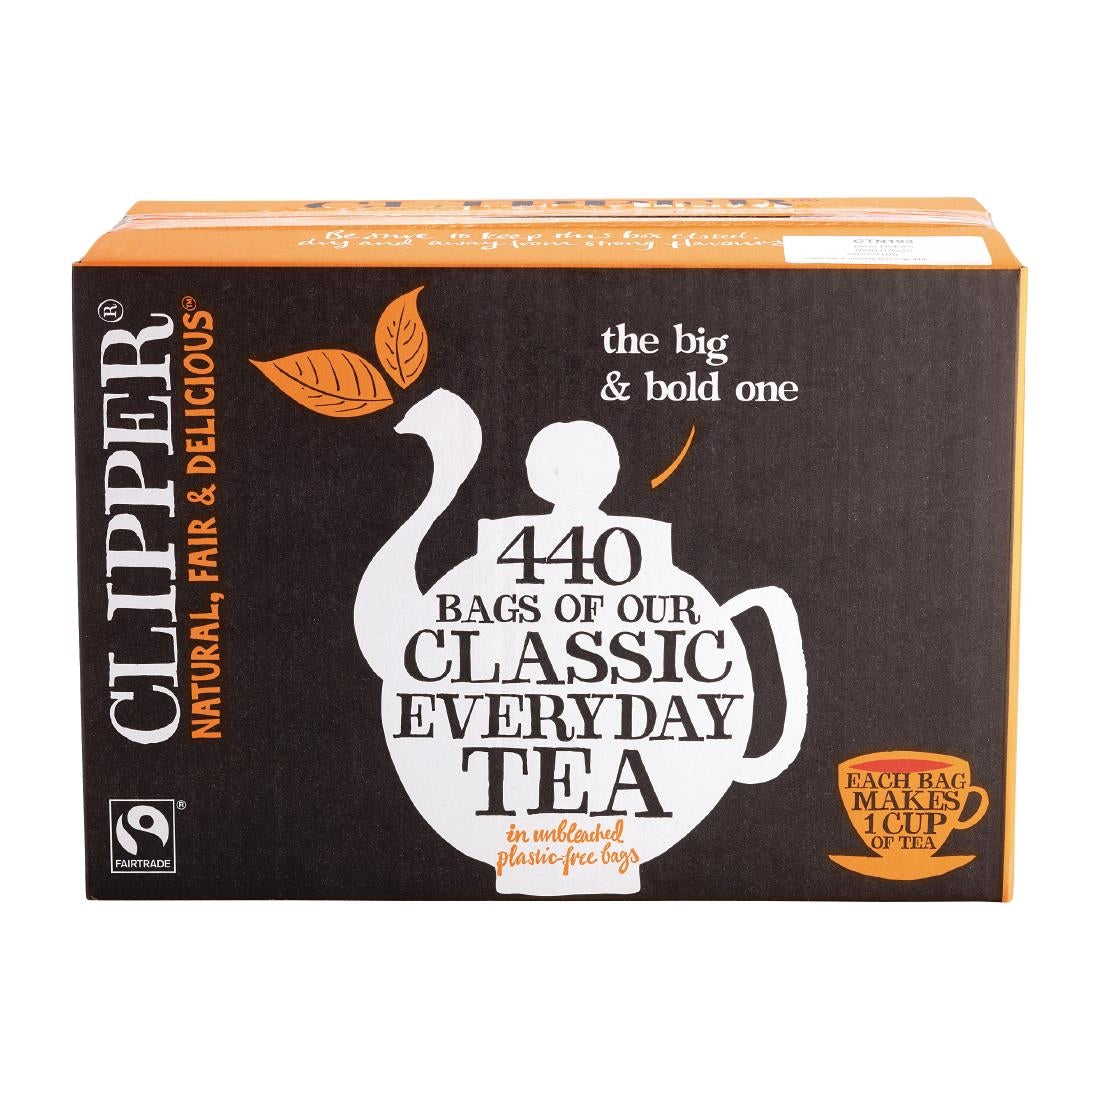 FW824 Clipper Fairtrade Teabags (Pack of 440) JD Catering Equipment Solutions Ltd